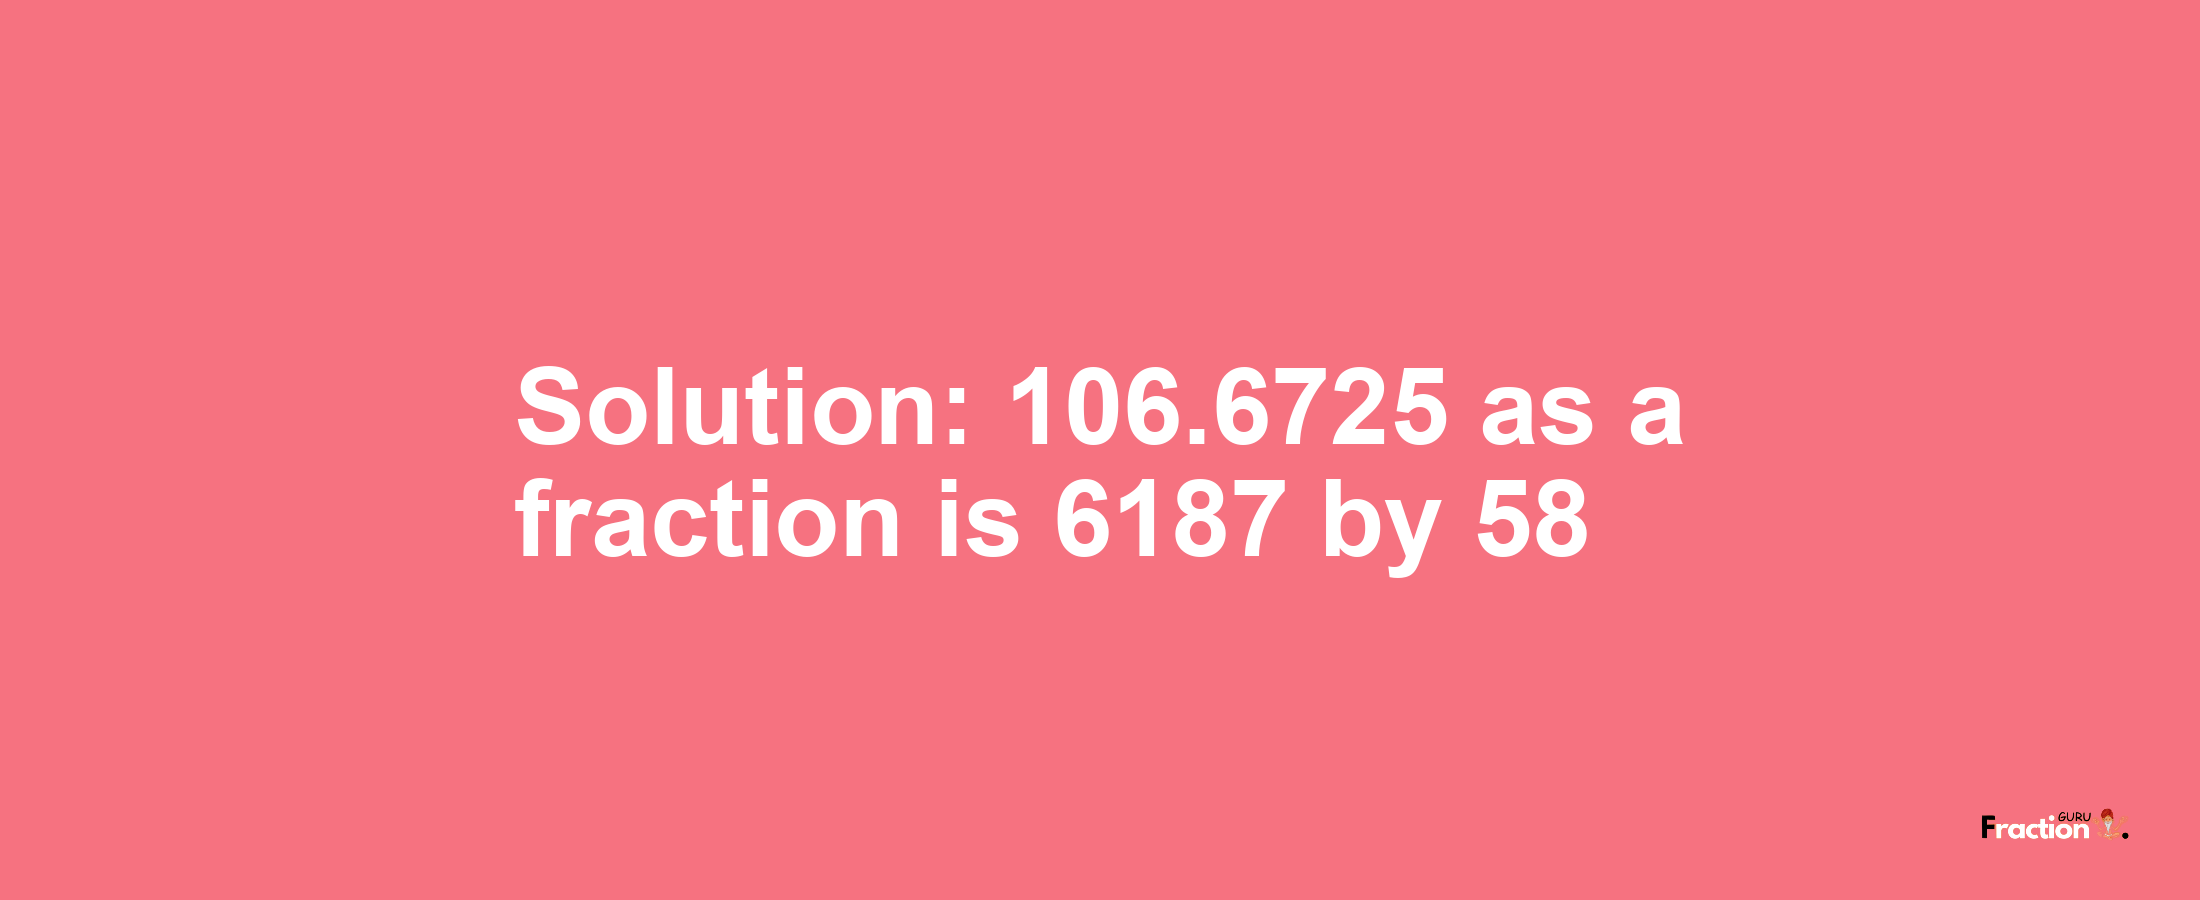 Solution:106.6725 as a fraction is 6187/58